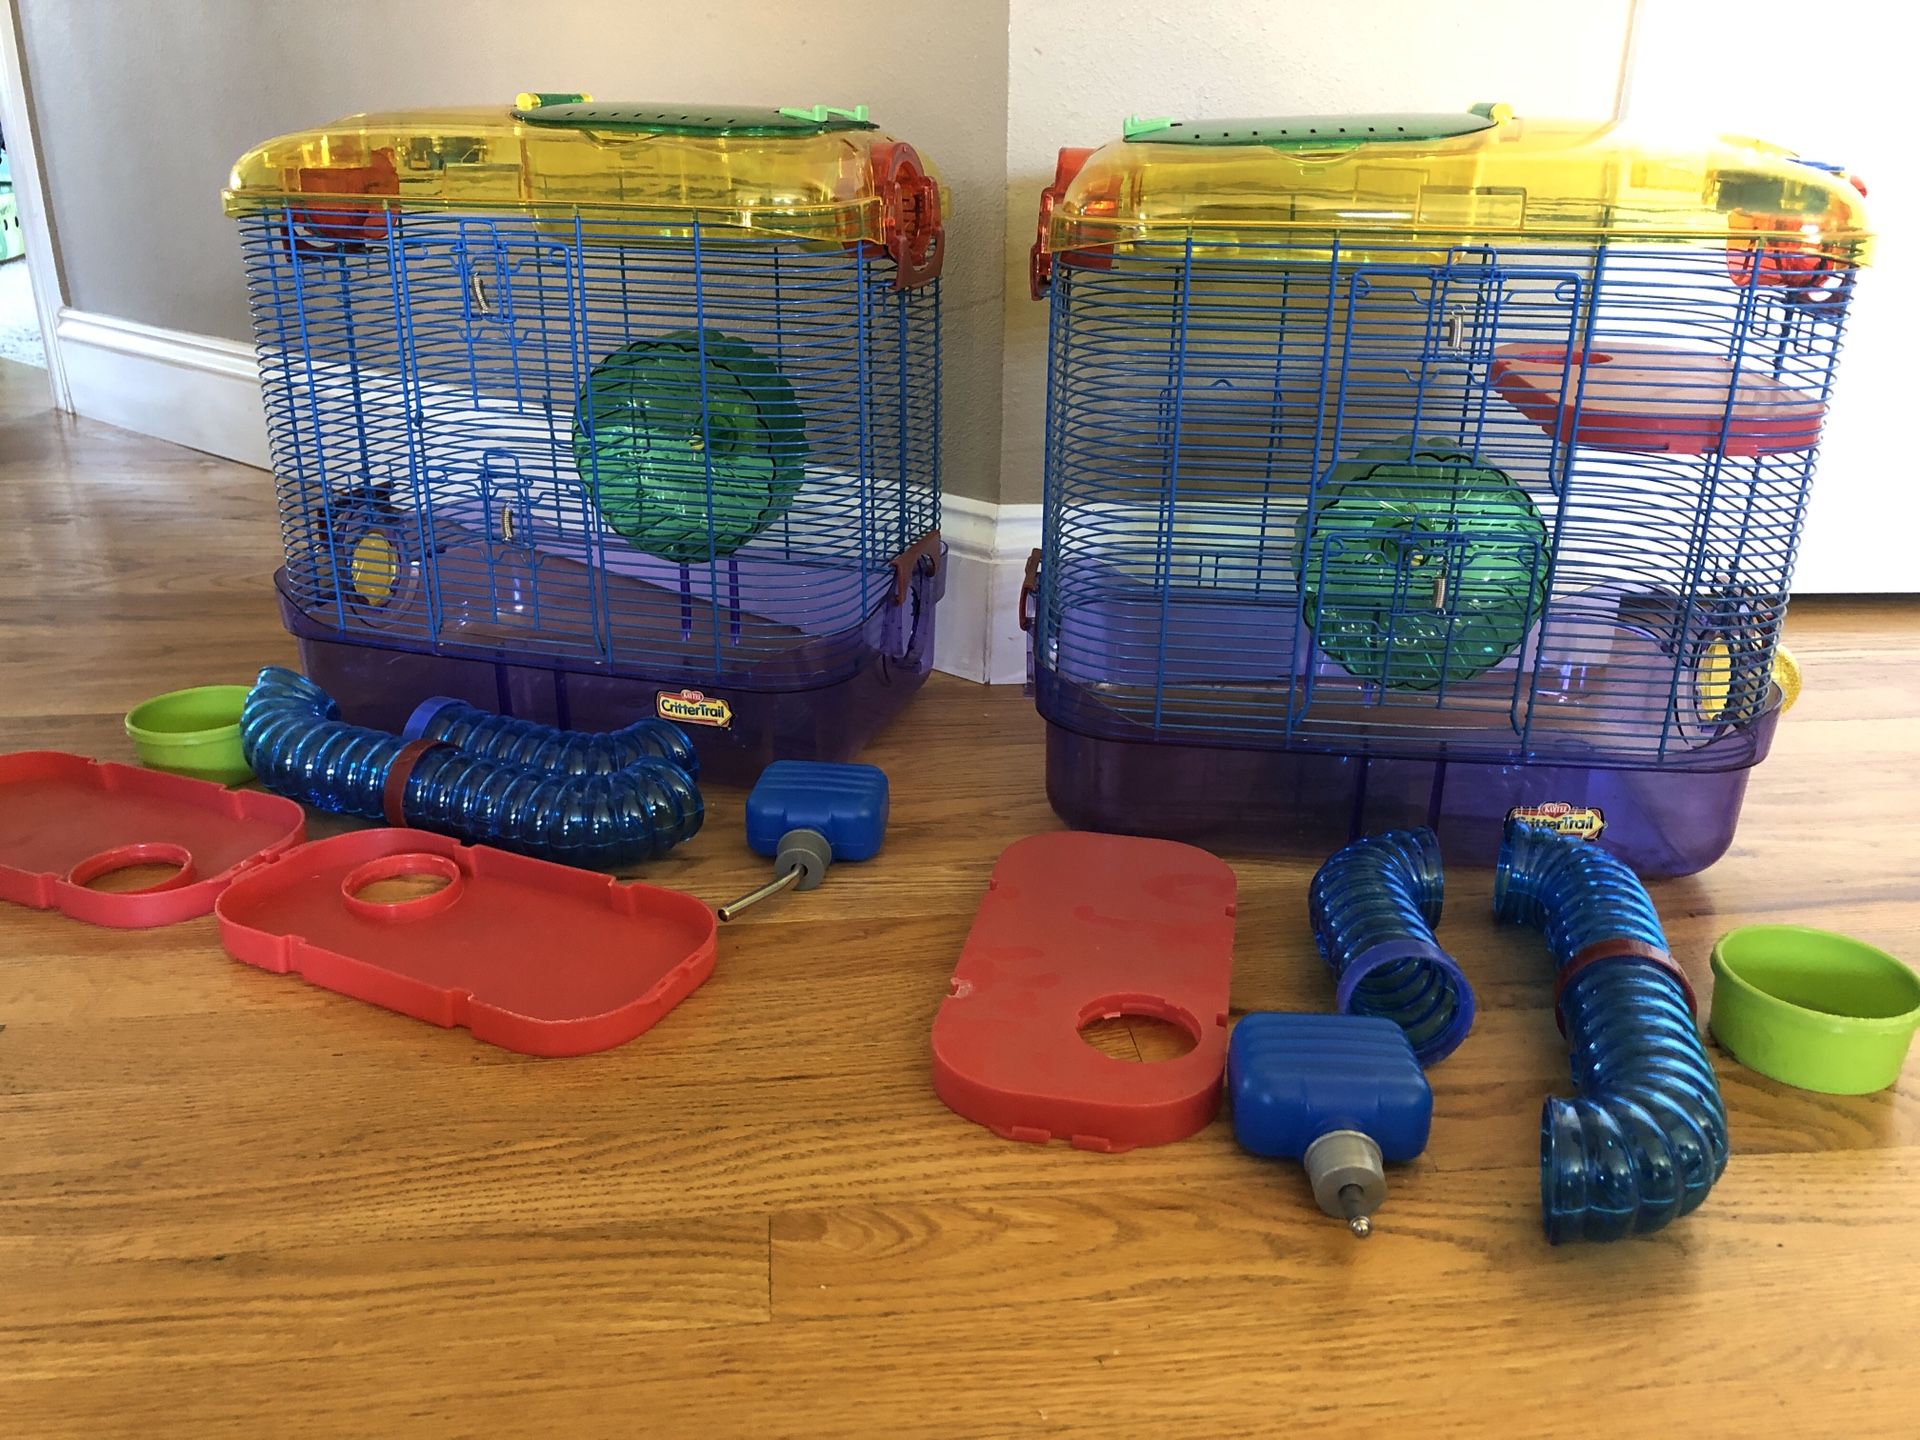 Kaytee Critter Trail cages and accessories